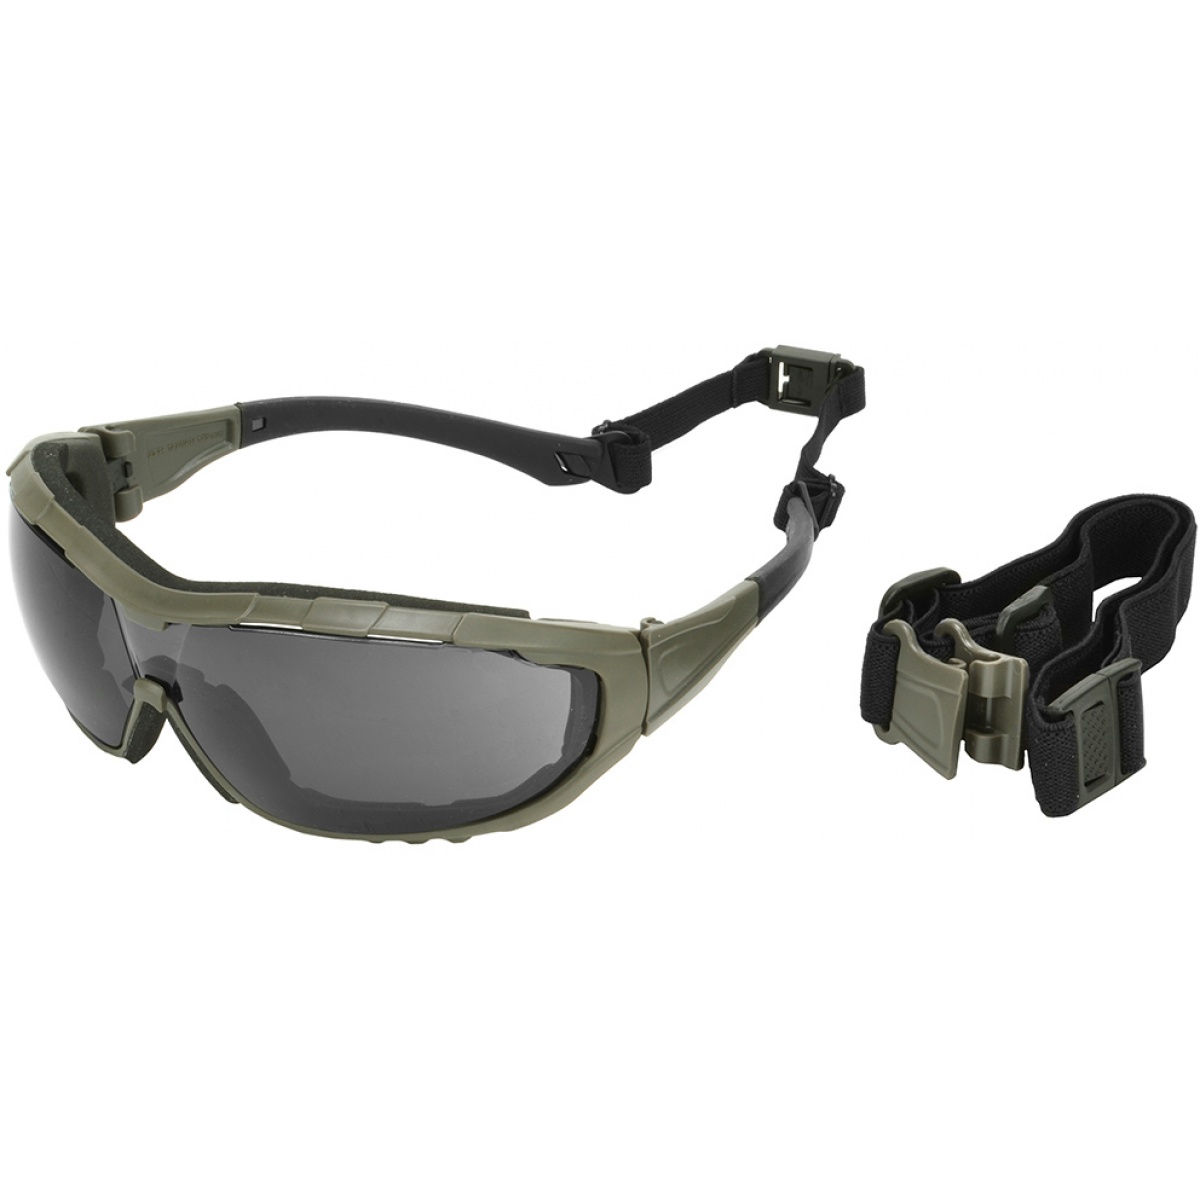 Clear Lens Axis Valken Airsoft Goggles 